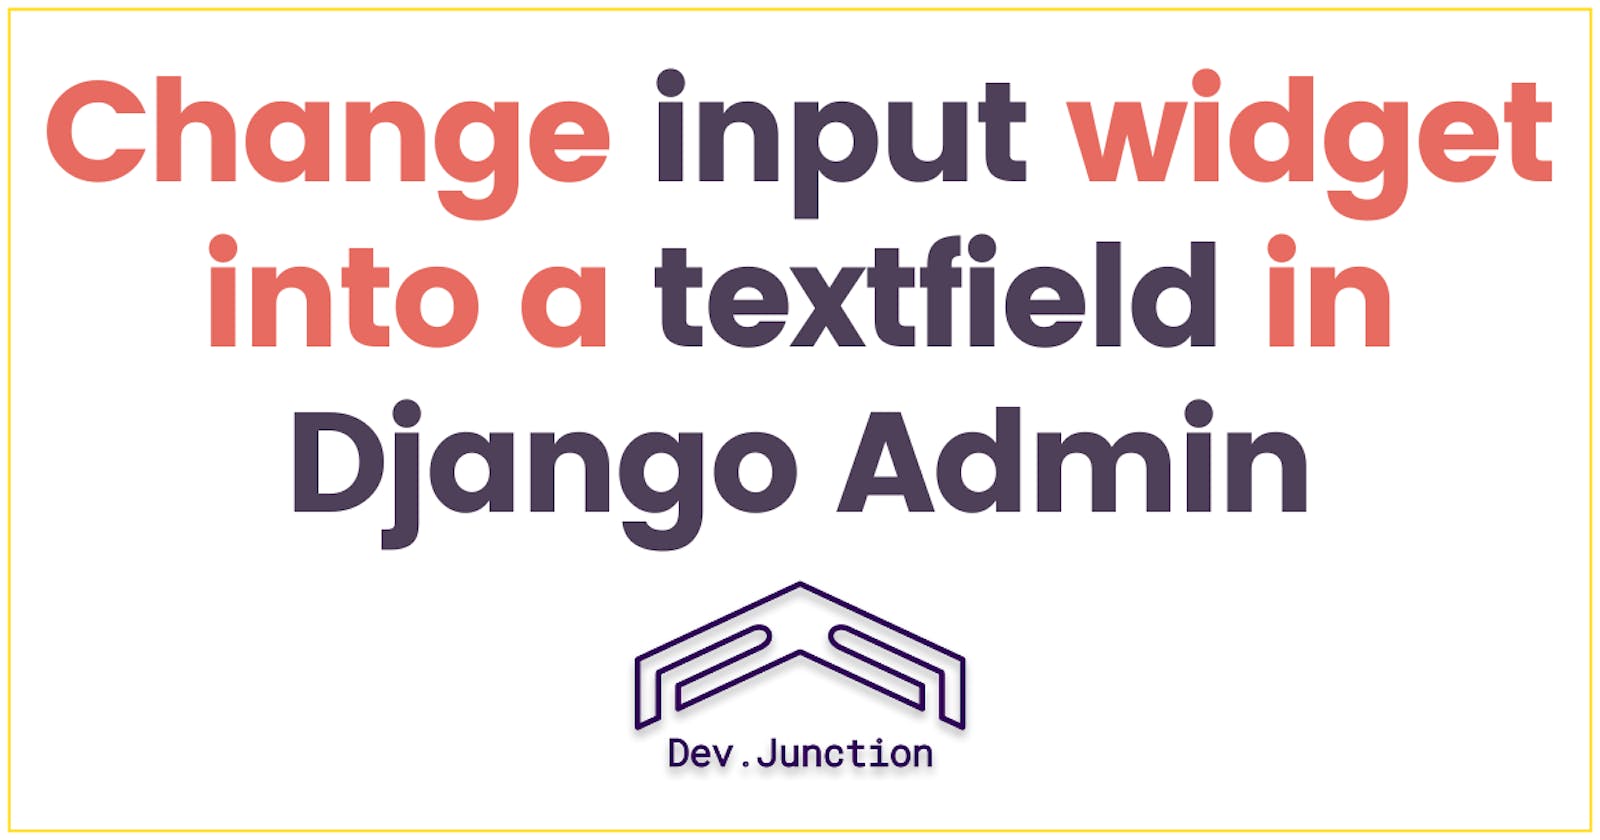 How to change the input widget into a textfield in Django Model Admin form?